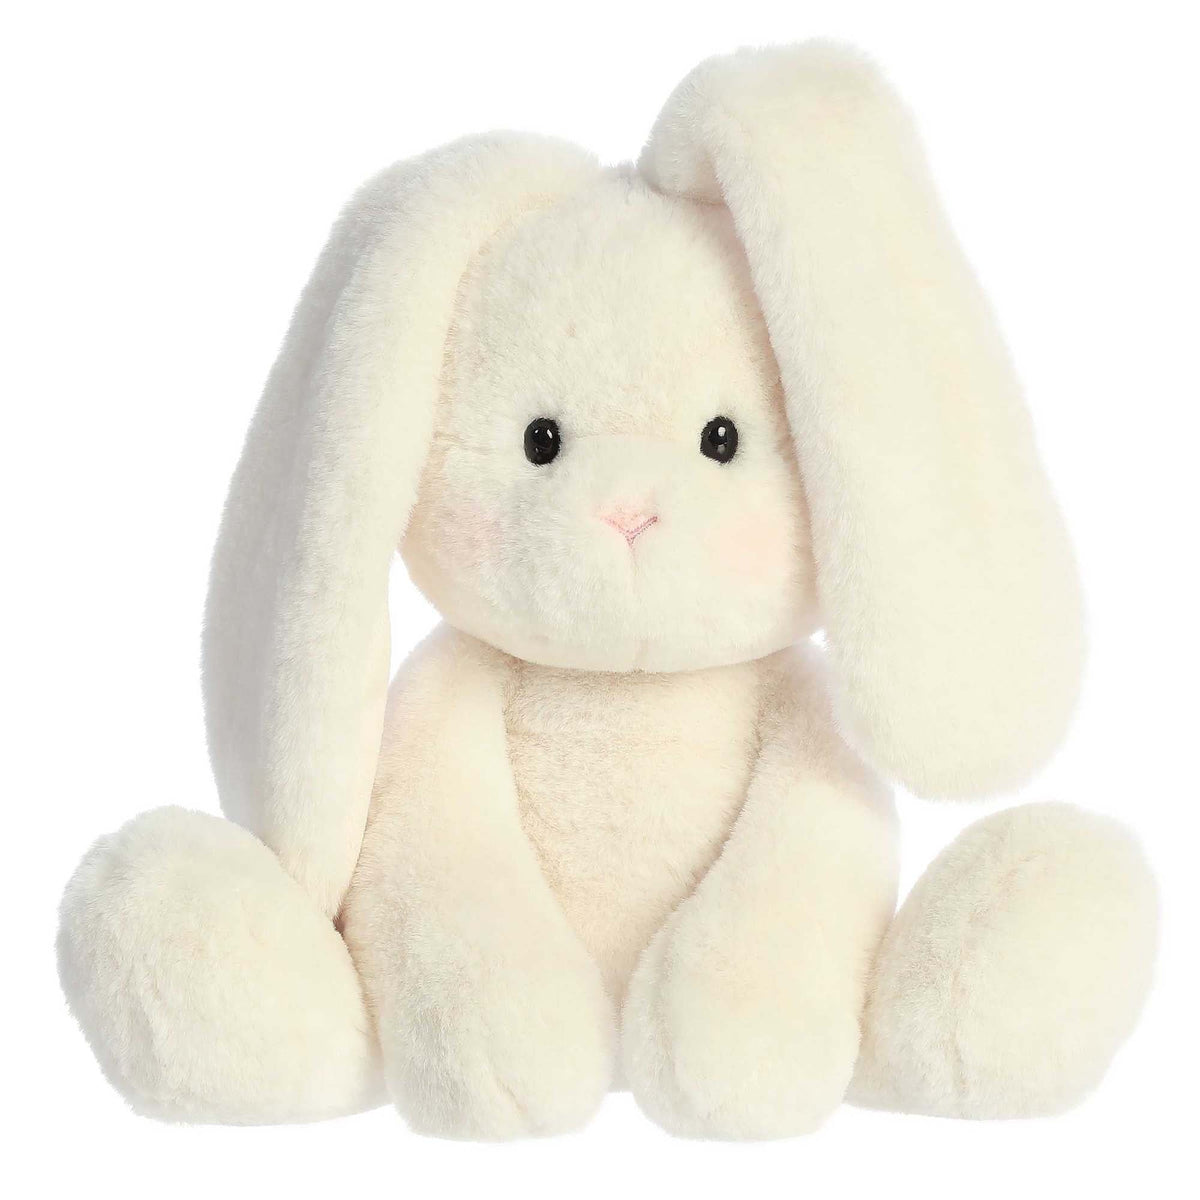 Aurora World Easter Candy Cottontails Rabbit Plush, Cream, 14 Inches, 1 Count 092943821149